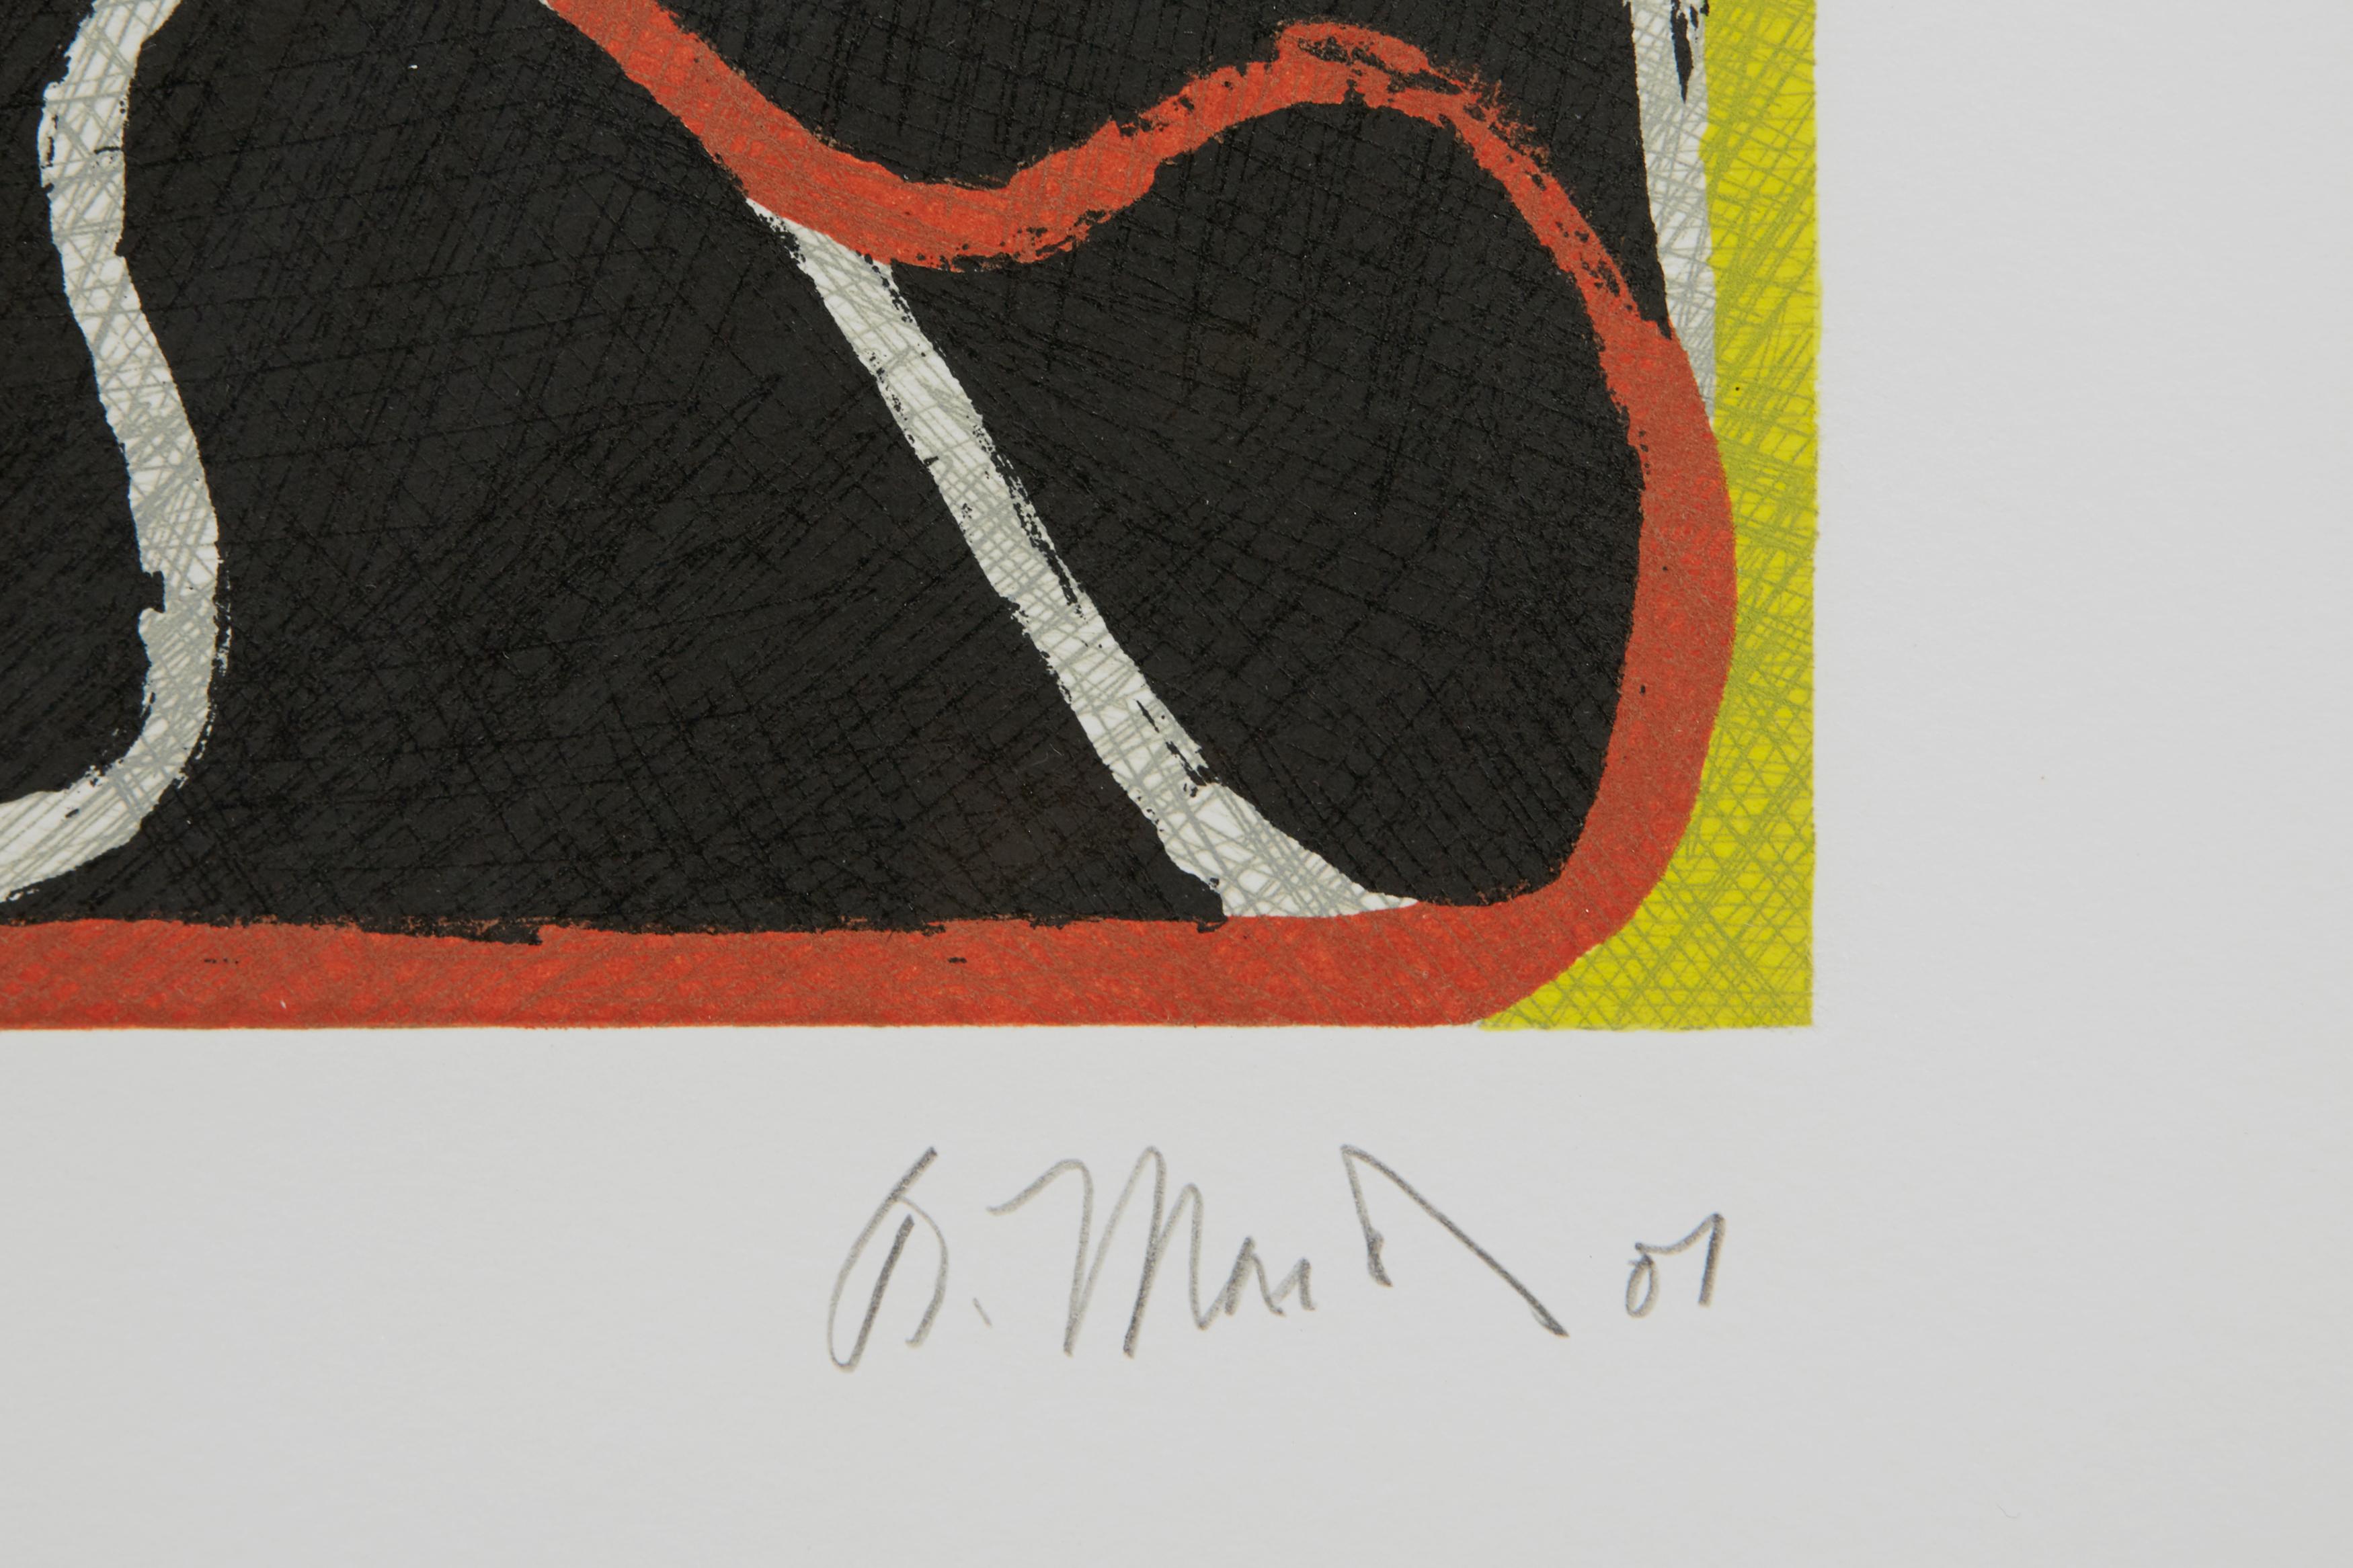 Beyond Eagles Mere 2 - Black Abstract Print by Brice Marden